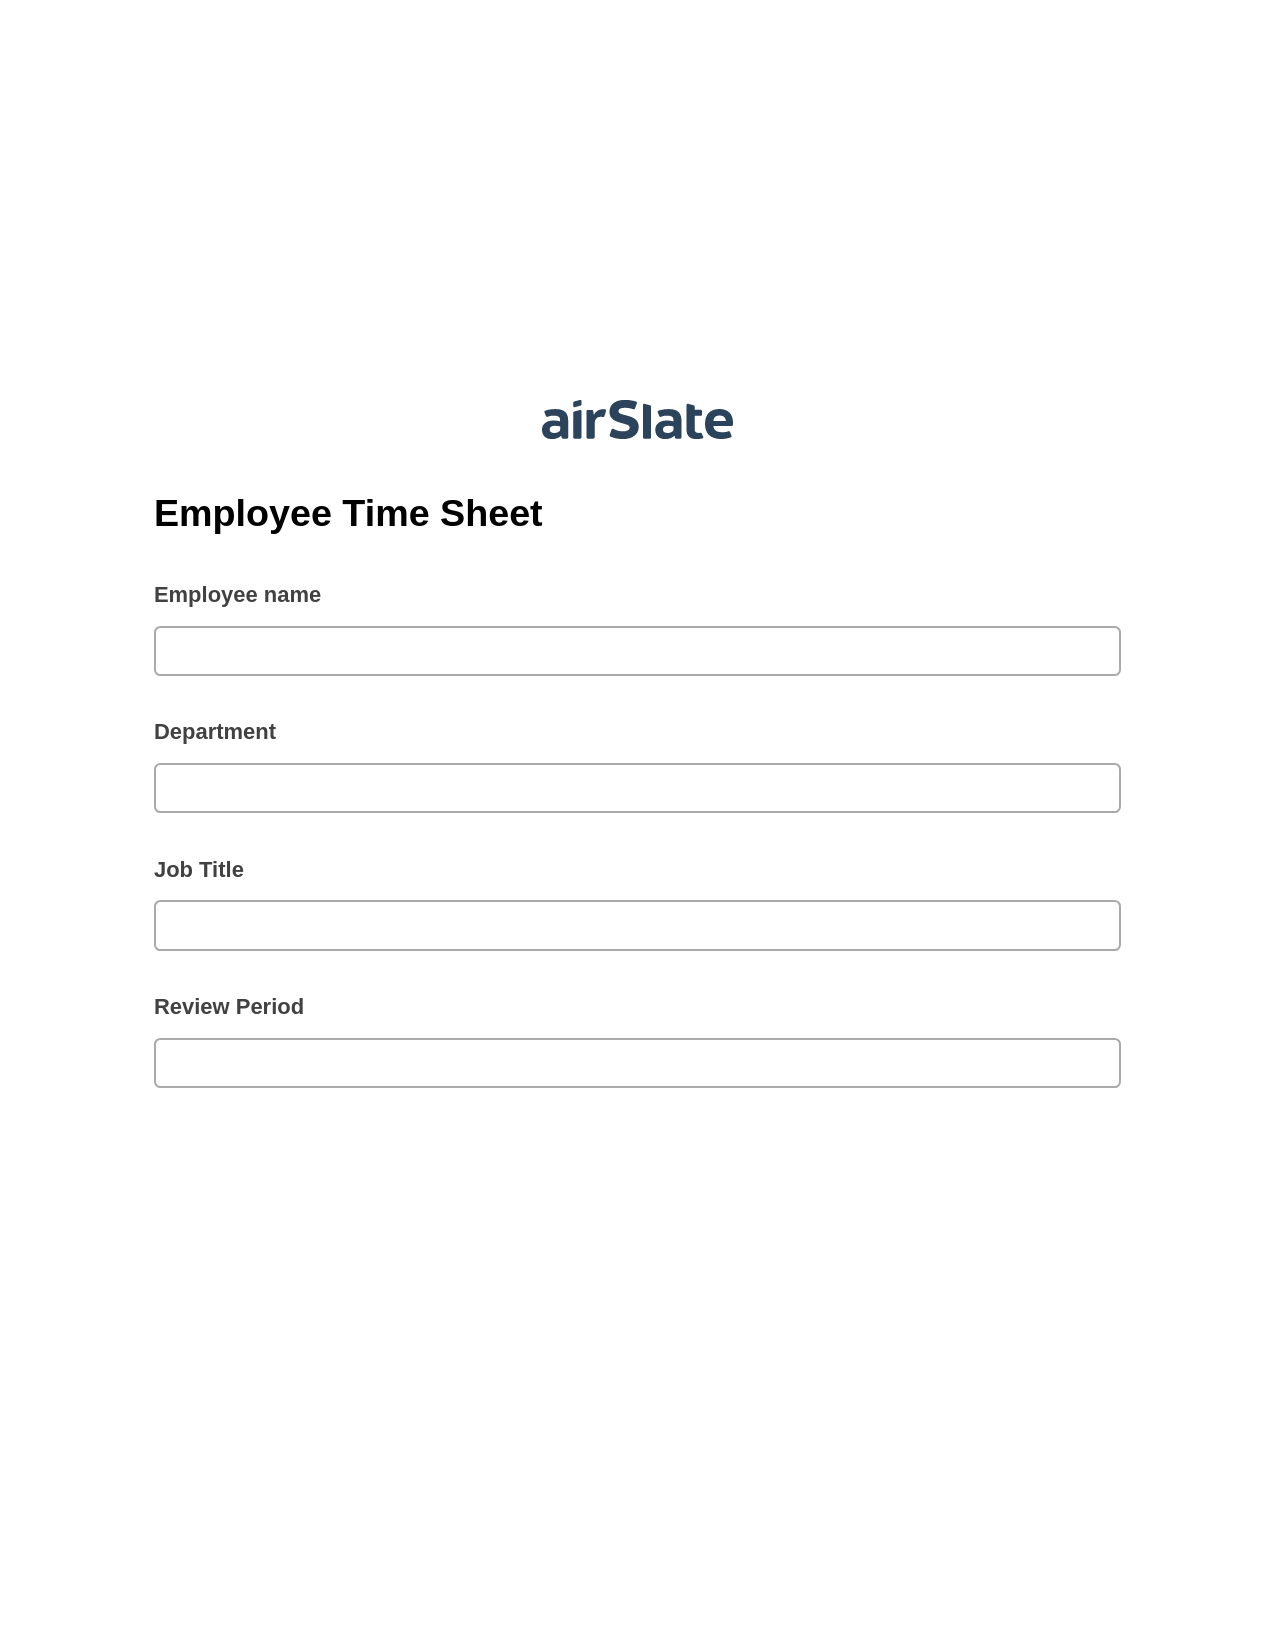 Employee Time Sheet Pre-fill Dropdowns from Airtable, Create slate addon, Archive to Google Drive Bot